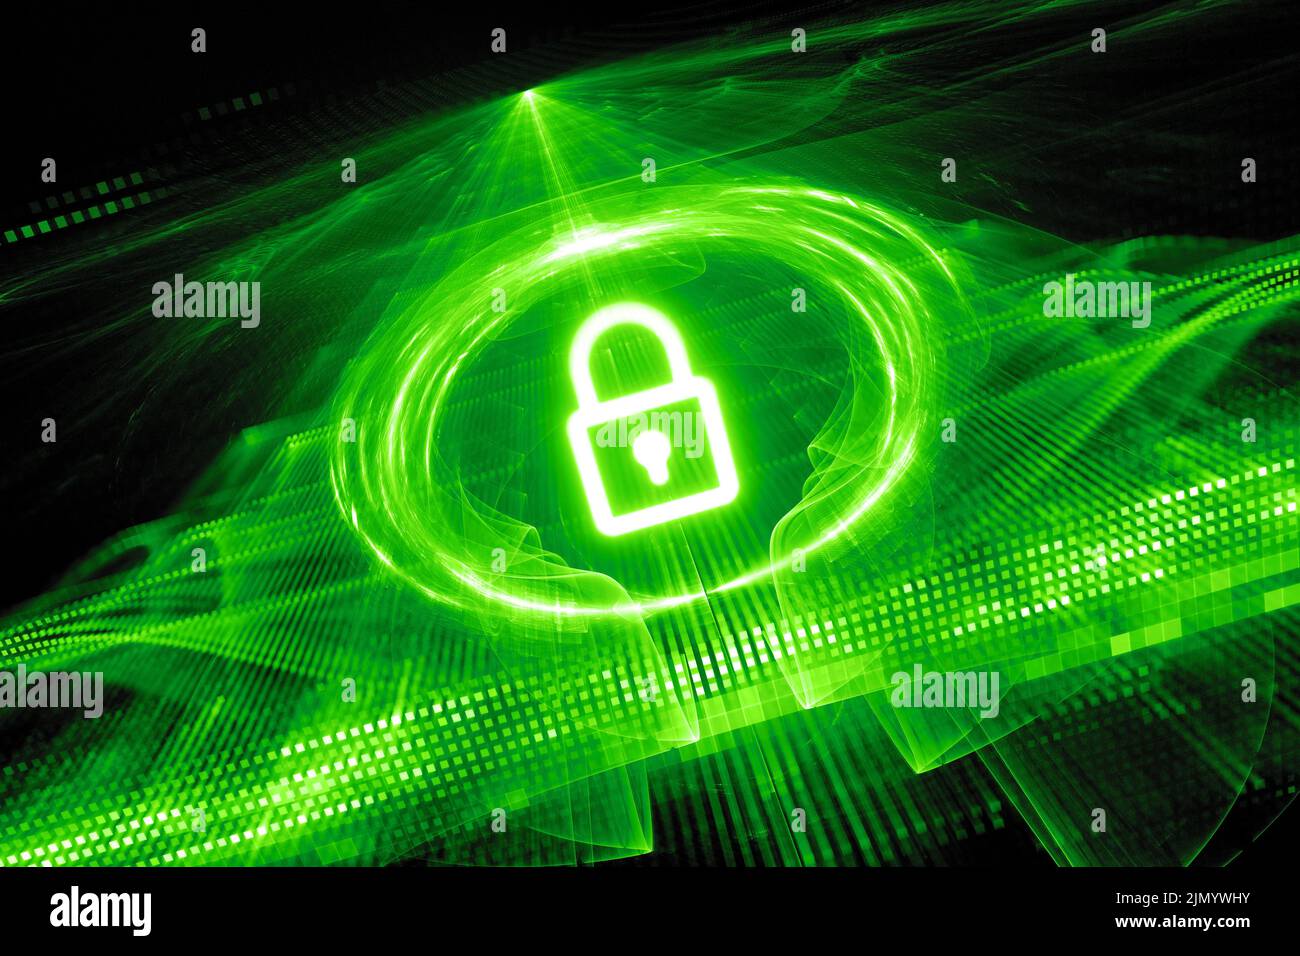 Green glowing vibrant quantum encryption, computer generated abstract fractal illustration, 3D rendering Stock Photo